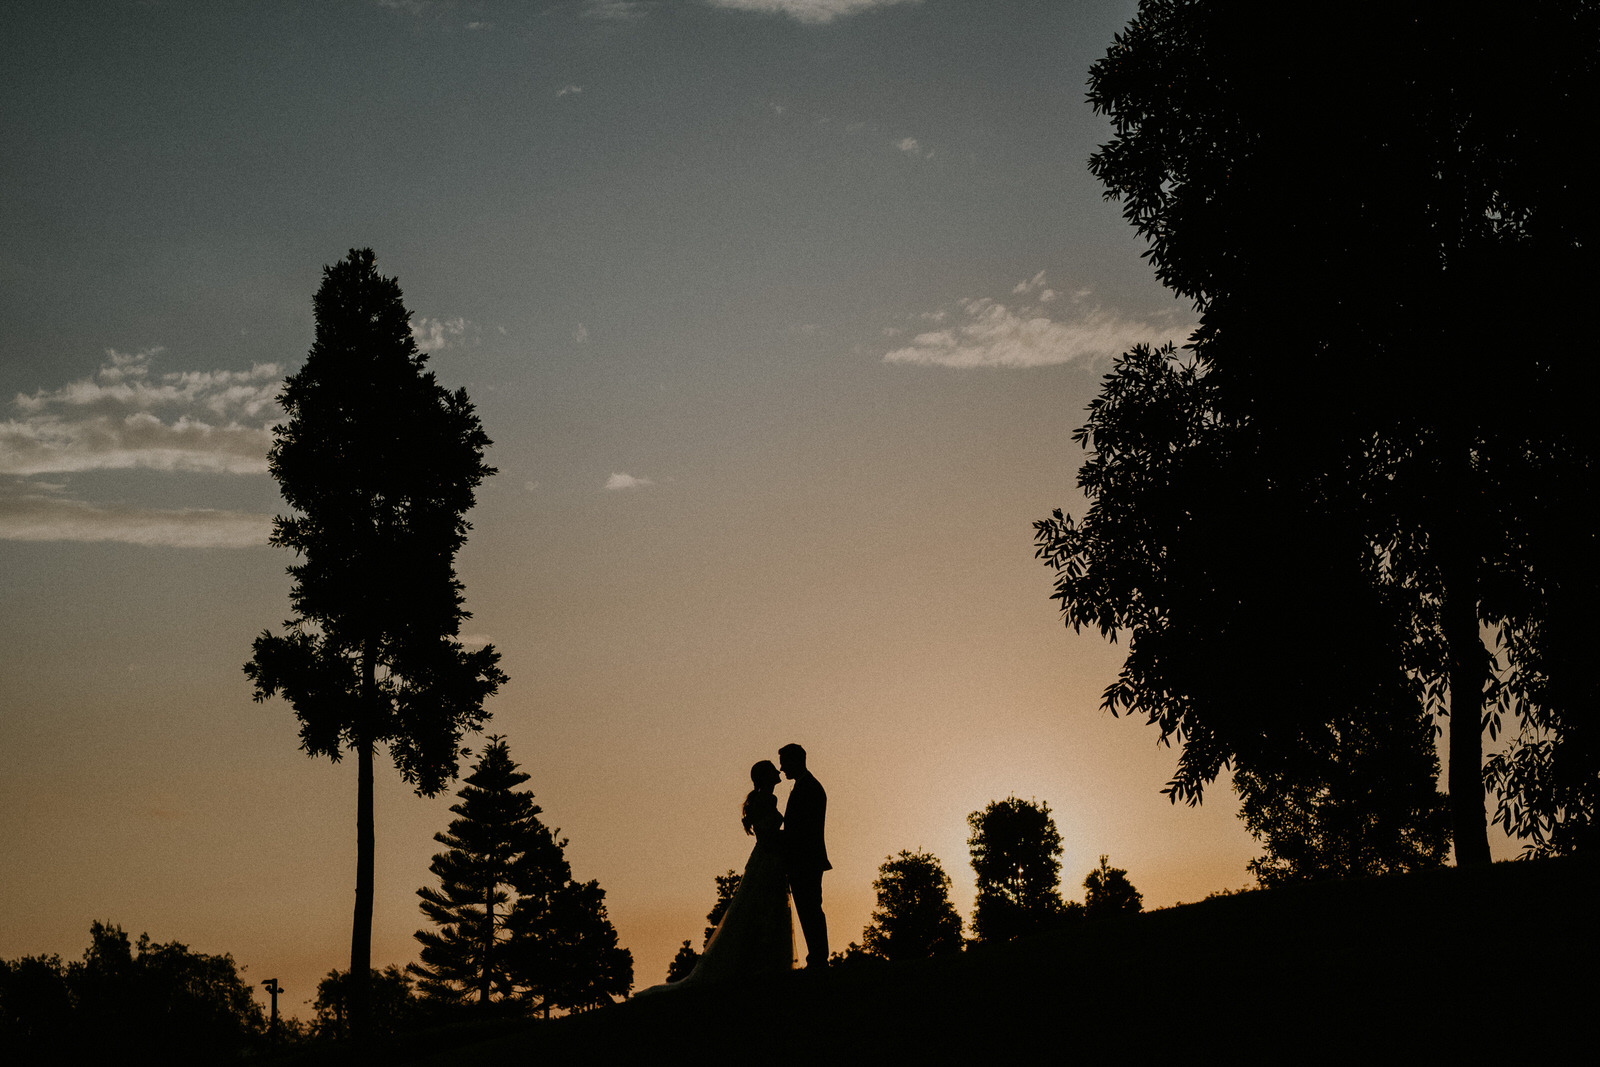 Bride and Groom silhoetted on hill. The couples heads are touching, surrounded by trees with the sun setting over the Gold Coast